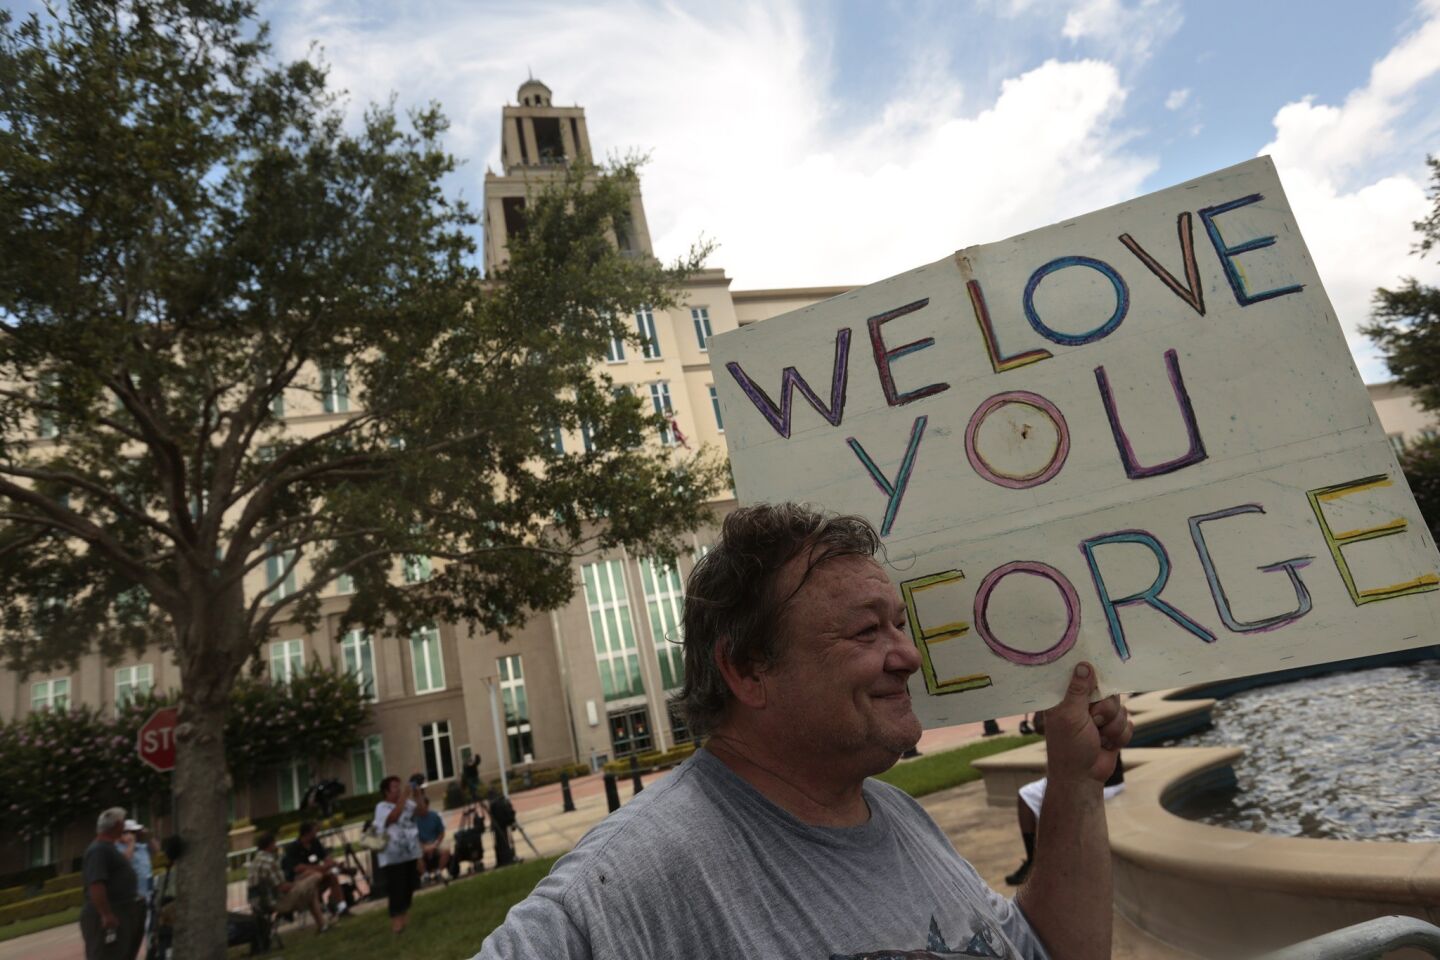 Ed Wilson, of Sanford, came to the Seminole County courthouse for the first time on Saturday, the first full day of jury deliberations in the case. "My emphasis is peace and love. We've always been a peaceful community here in Seminole. Now it's up to the six women" on the jury, he said.